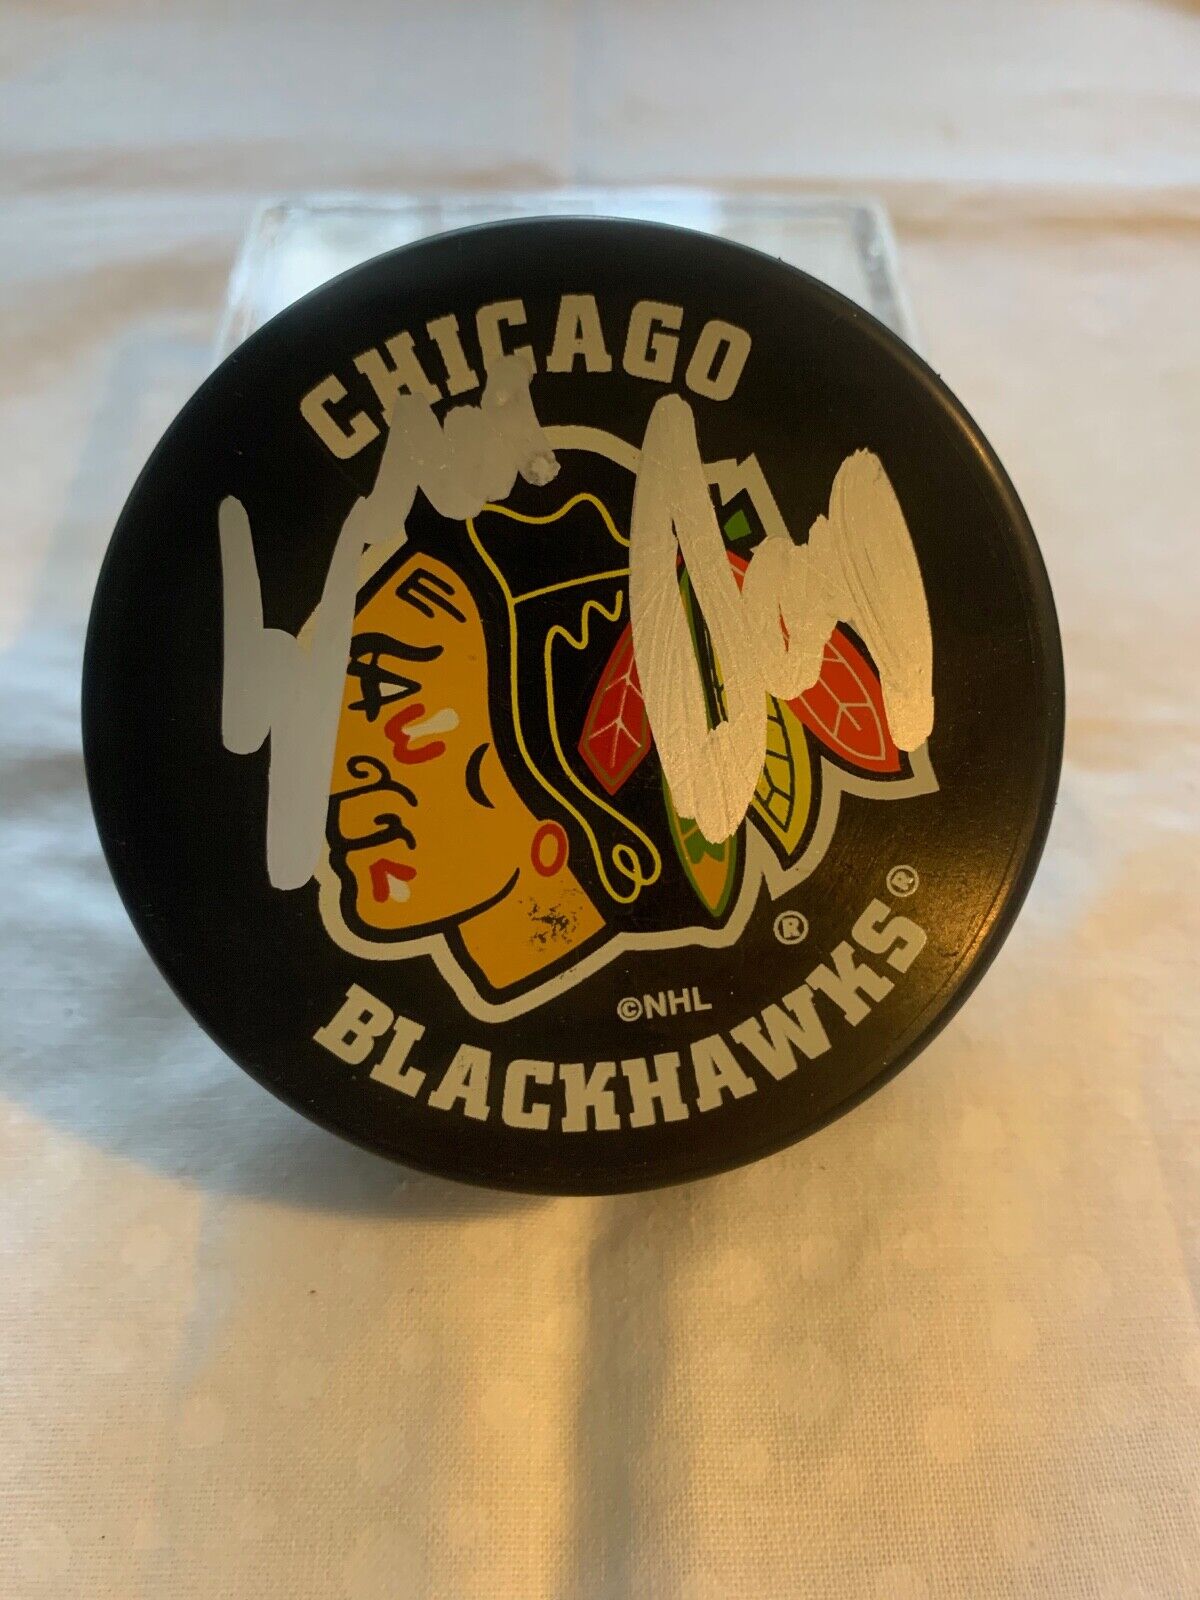 Chicago Blackhawks NHL Puck 2 Autographed by Eric Daze w/ All Sports COA